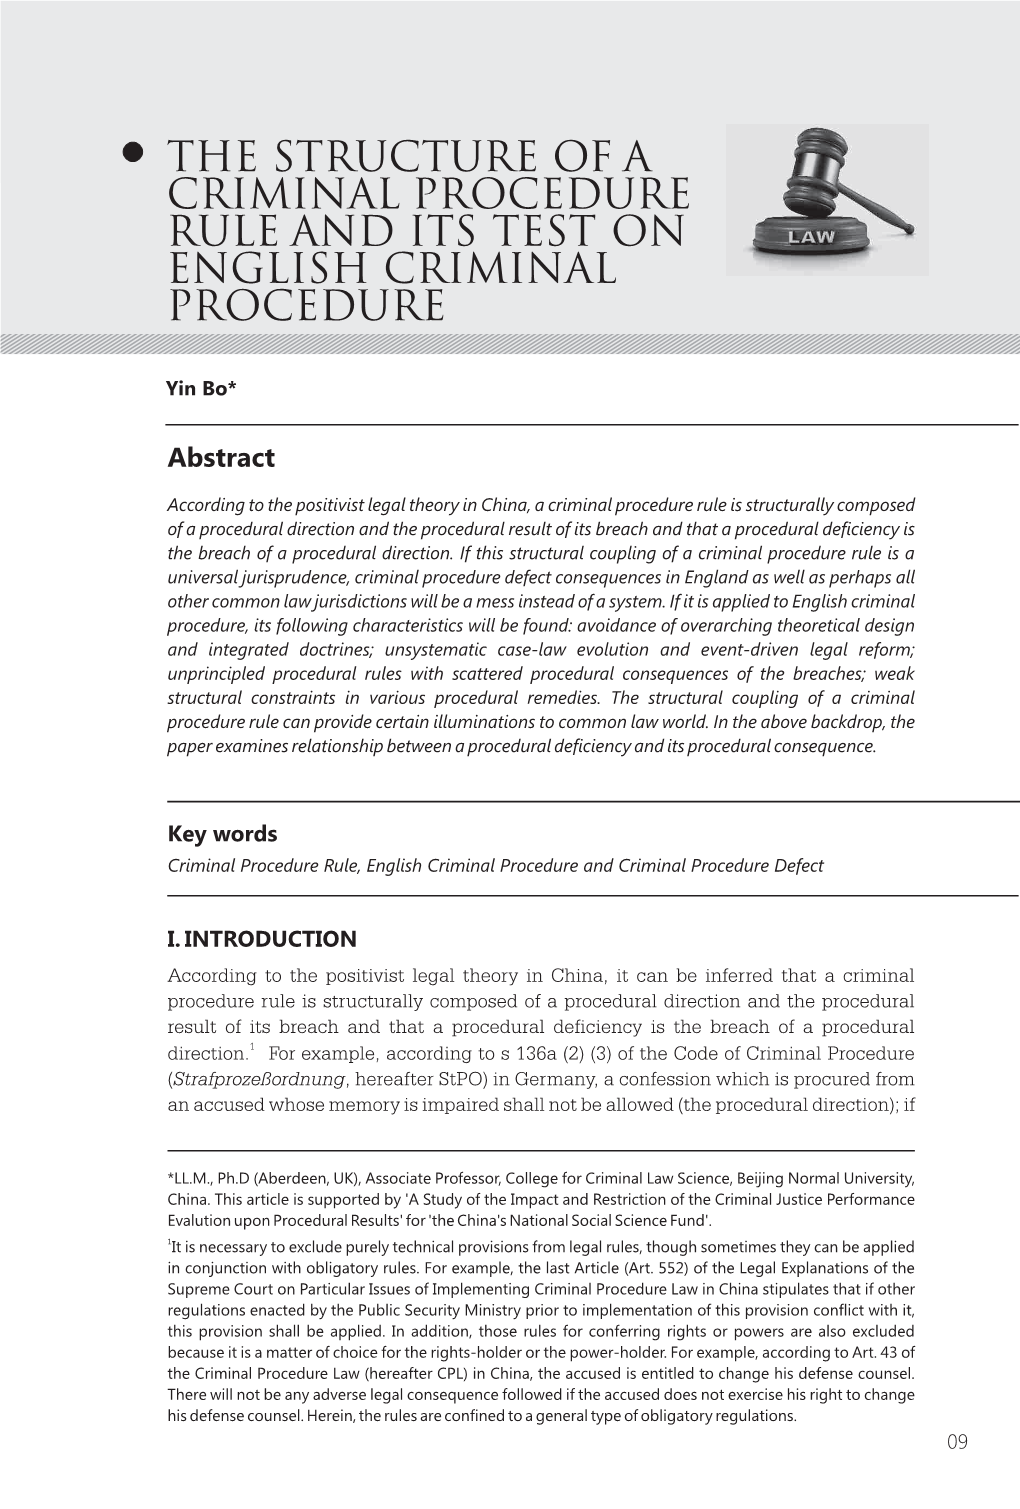 The Structure of a Criminal Procedure Rule and Its Test on English Criminal Procedure